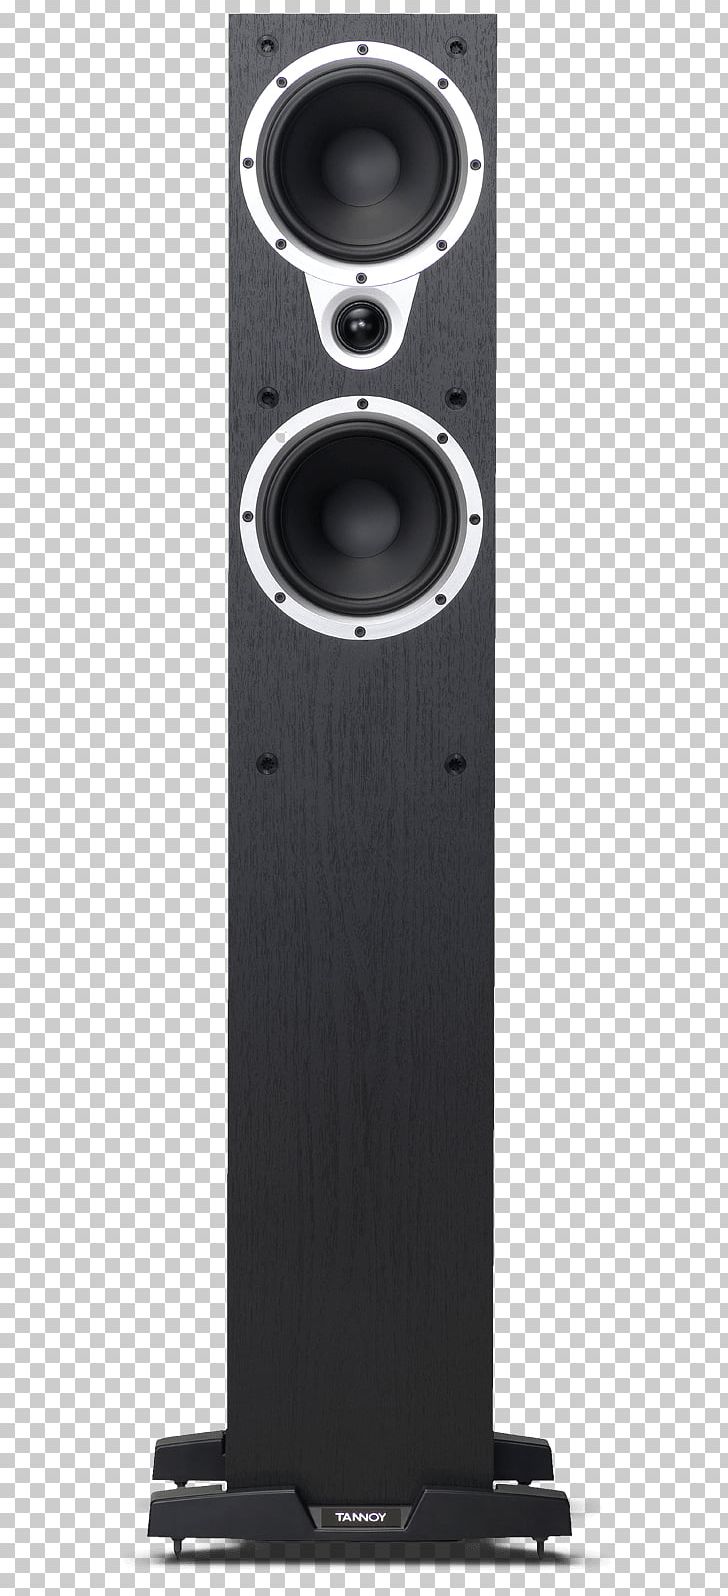 TANNOY Eclipse Two Floorstanding Speaker Loudspeaker High Fidelity Audio PNG, Clipart, Audio Equipment, Audiophile, Bass, Computer Speaker, Eclipse Free PNG Download